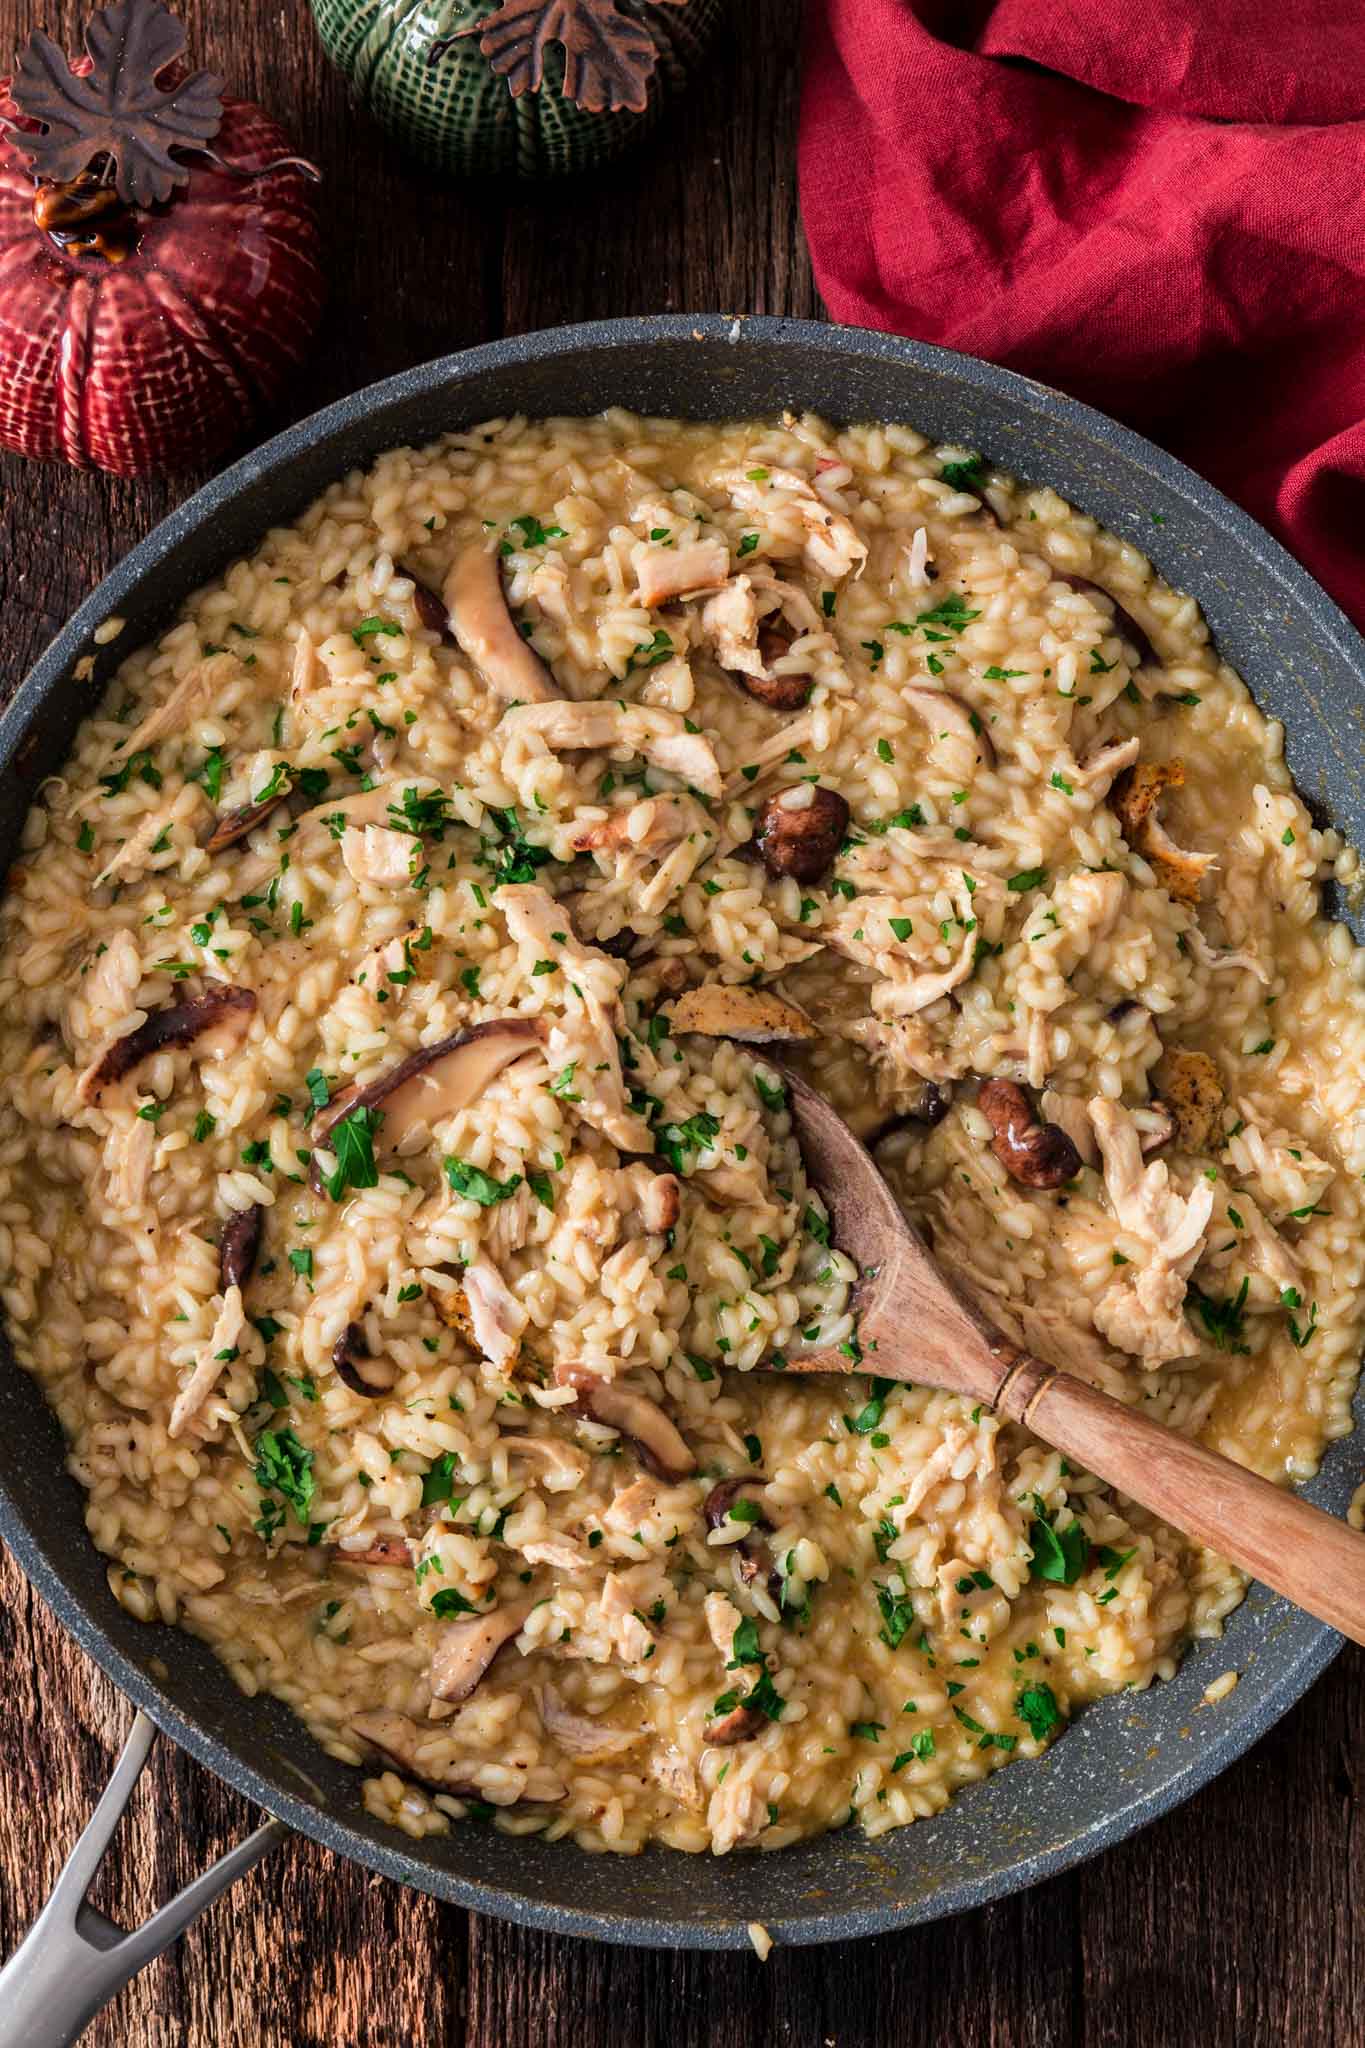 Mushroom and Turkey Risotto | www.oliviascuisine.com | Hosting an intimate, low key Thanksgiving/Friendsgiving? Ditch the whole bird for this elegant Mushroom and Turkey Risotto instead. Also great as a way to use day-after leftovers. (Recipe and food photography by @oliviascuisine.)